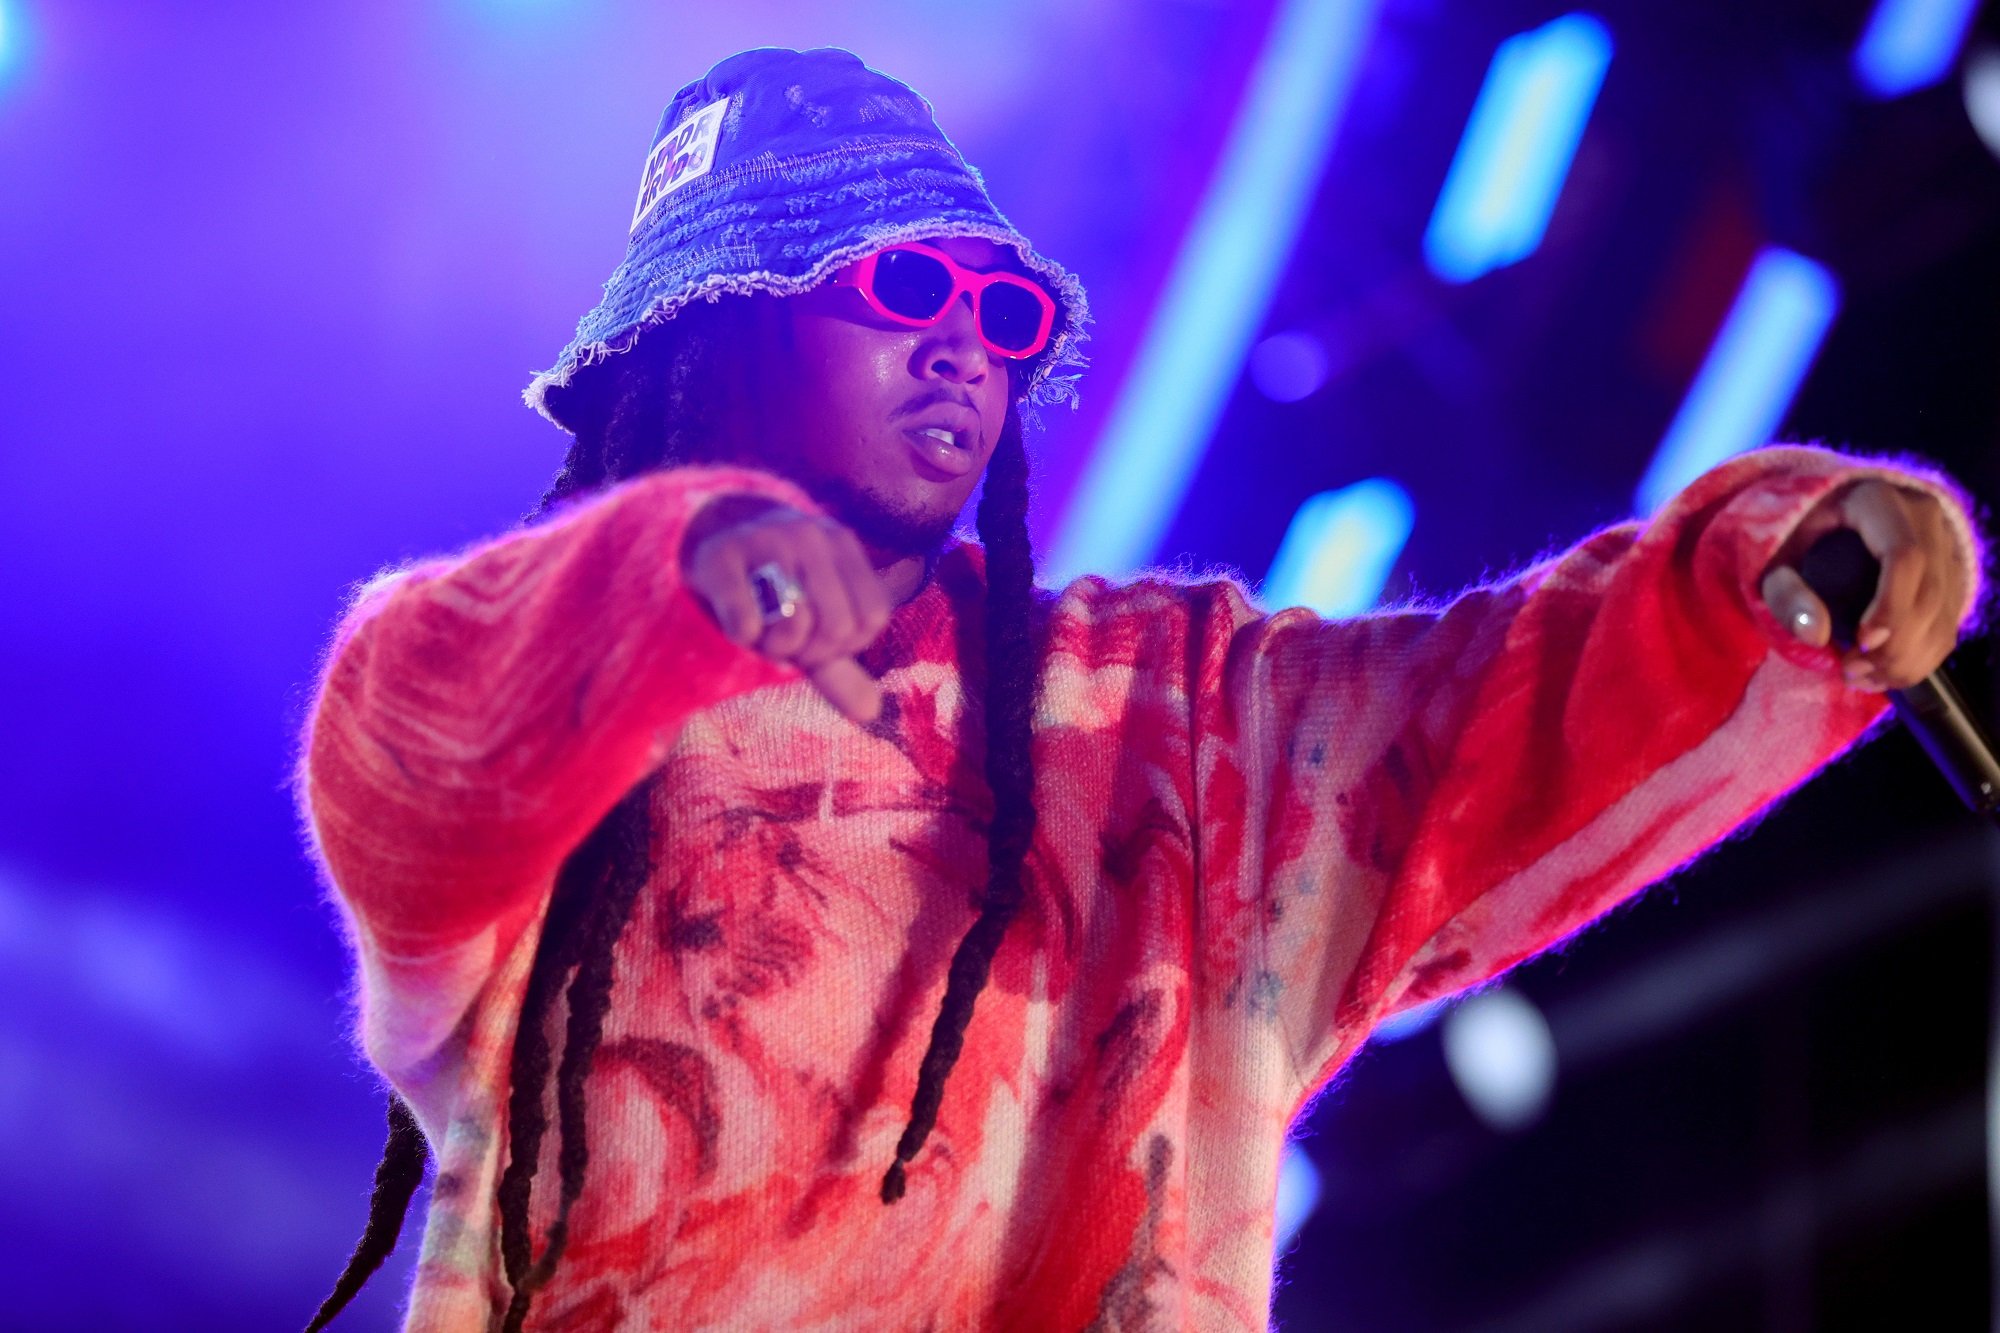 Takeoff performs wearing a denim bucket hat, red sunglasses, and a red sweater